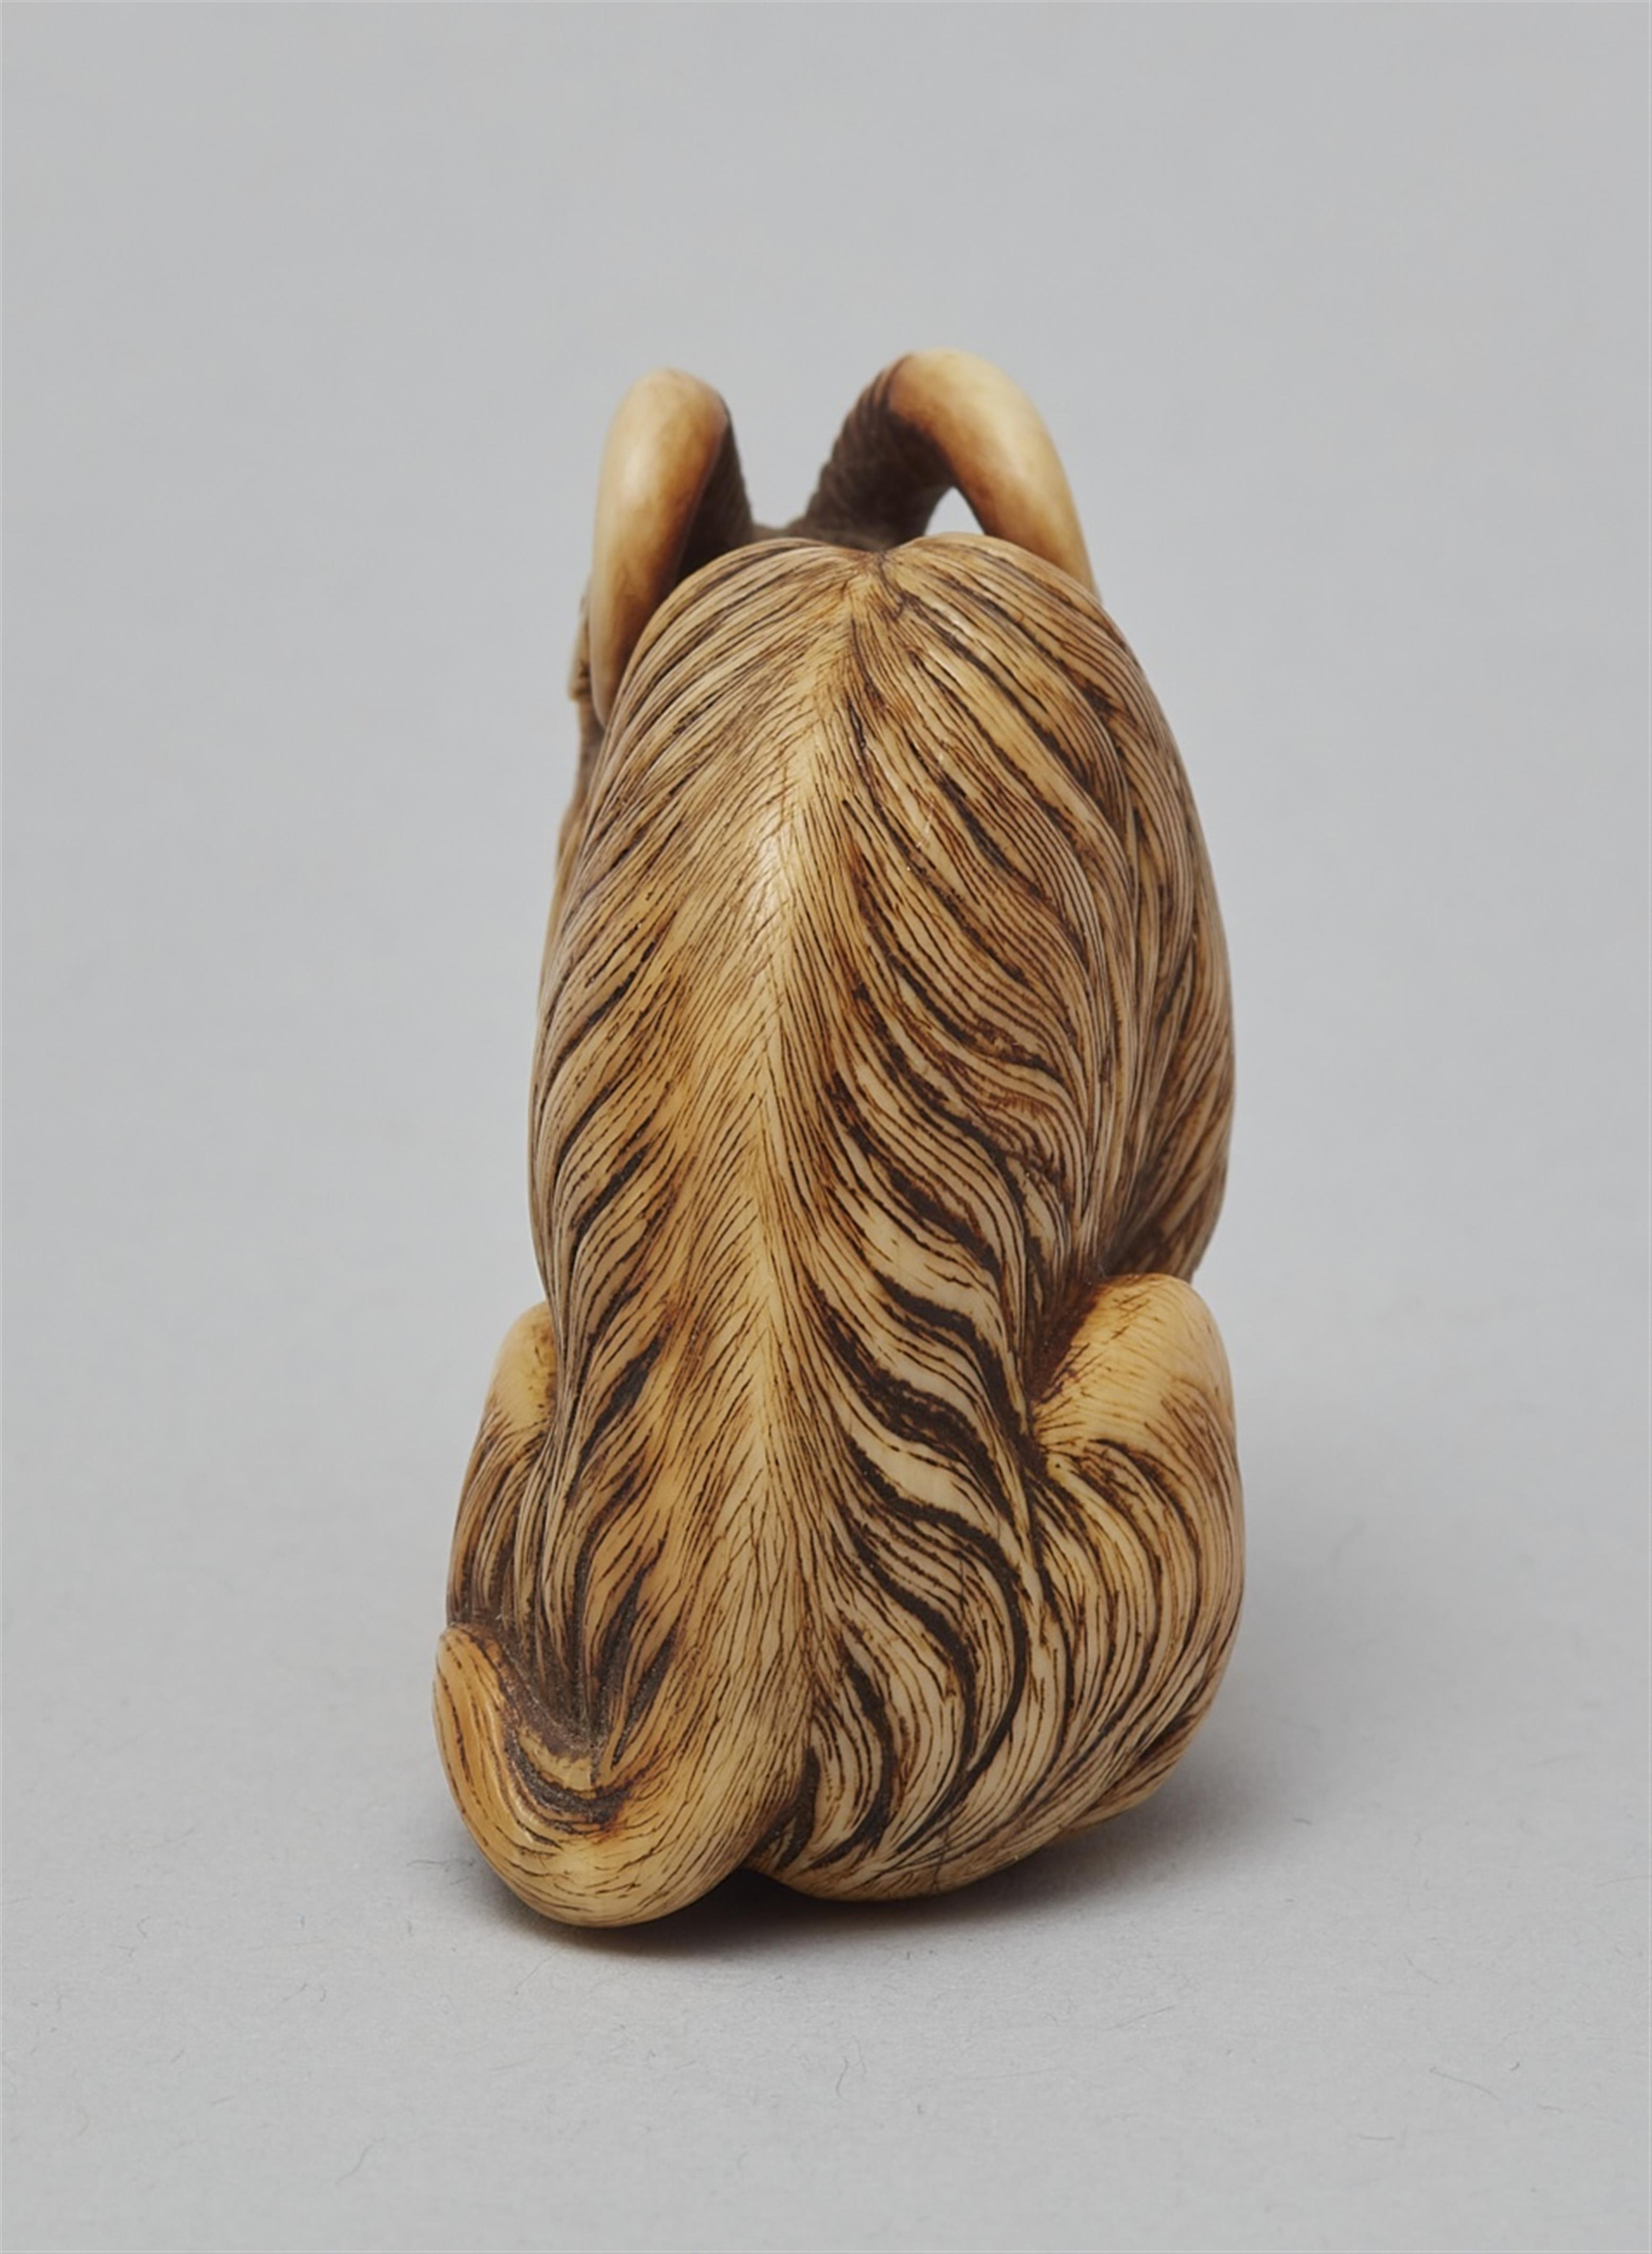 An ivory netsuke of a long-haired goat, by Okakoto. Early 19th century - image-6